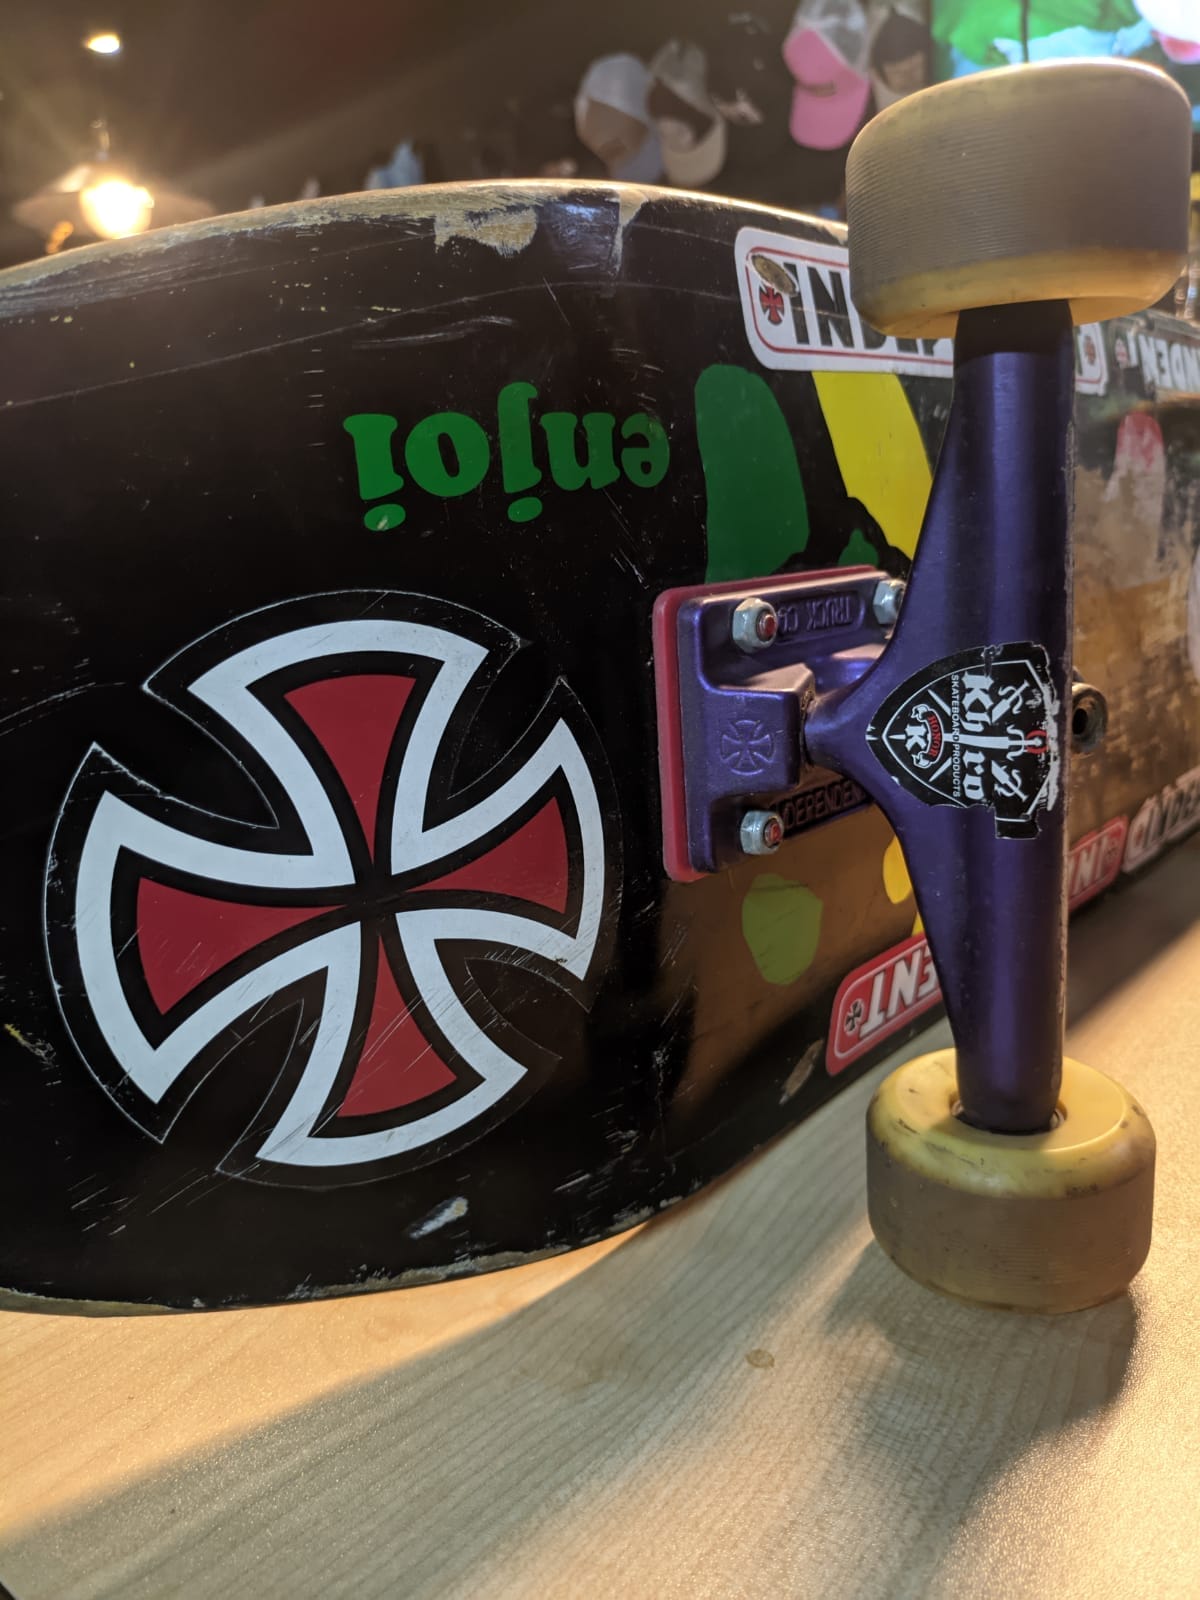 Another view of Kyle's old skateboard